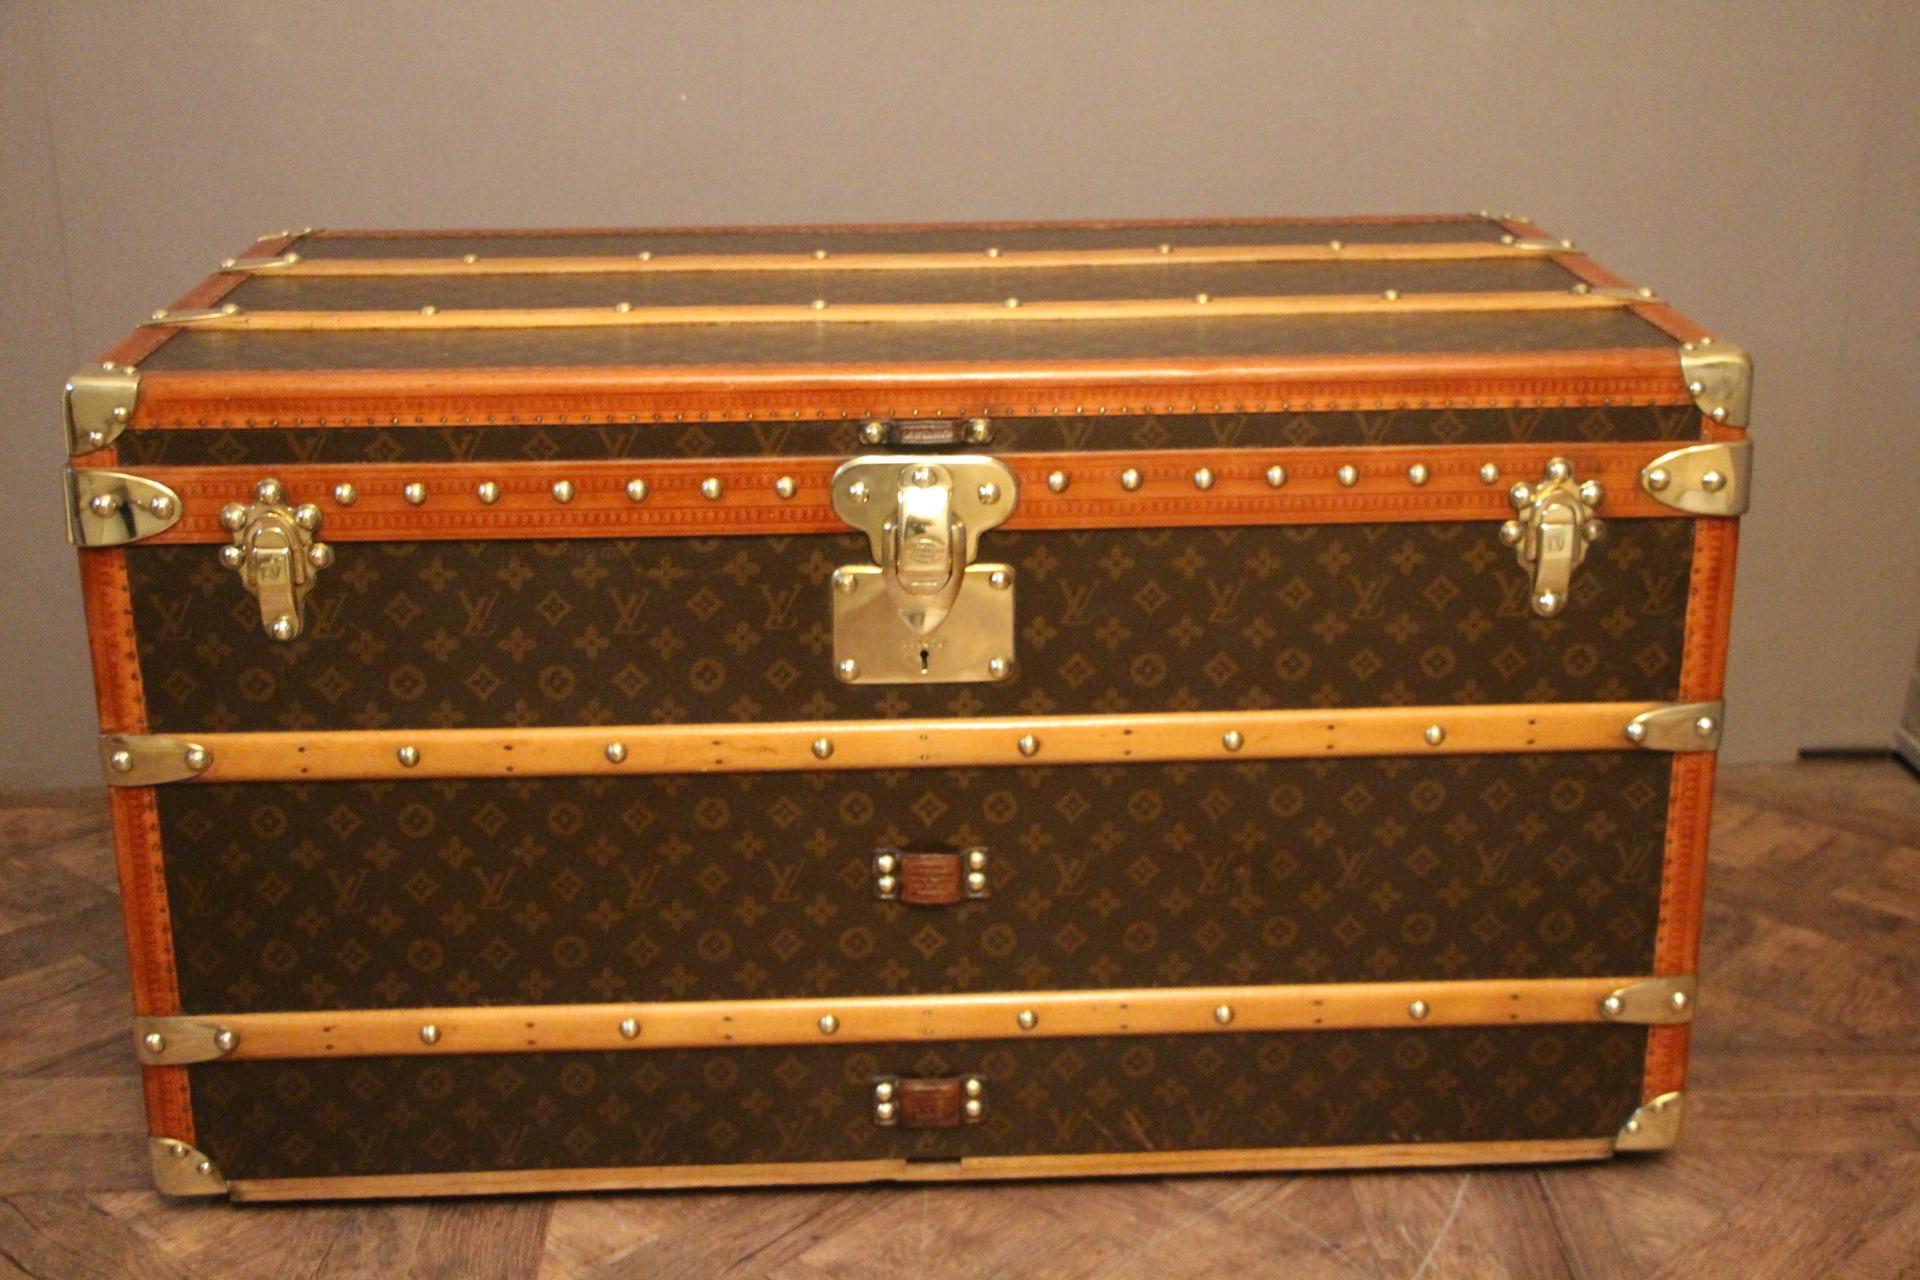 This superb Louis Vuitton steamer trunk features stenciled monogram canvas, lozine trim, LV stamped solid brass locks and studs as well as leather side handles and brass corners. It has got a beautiful original patina and is very